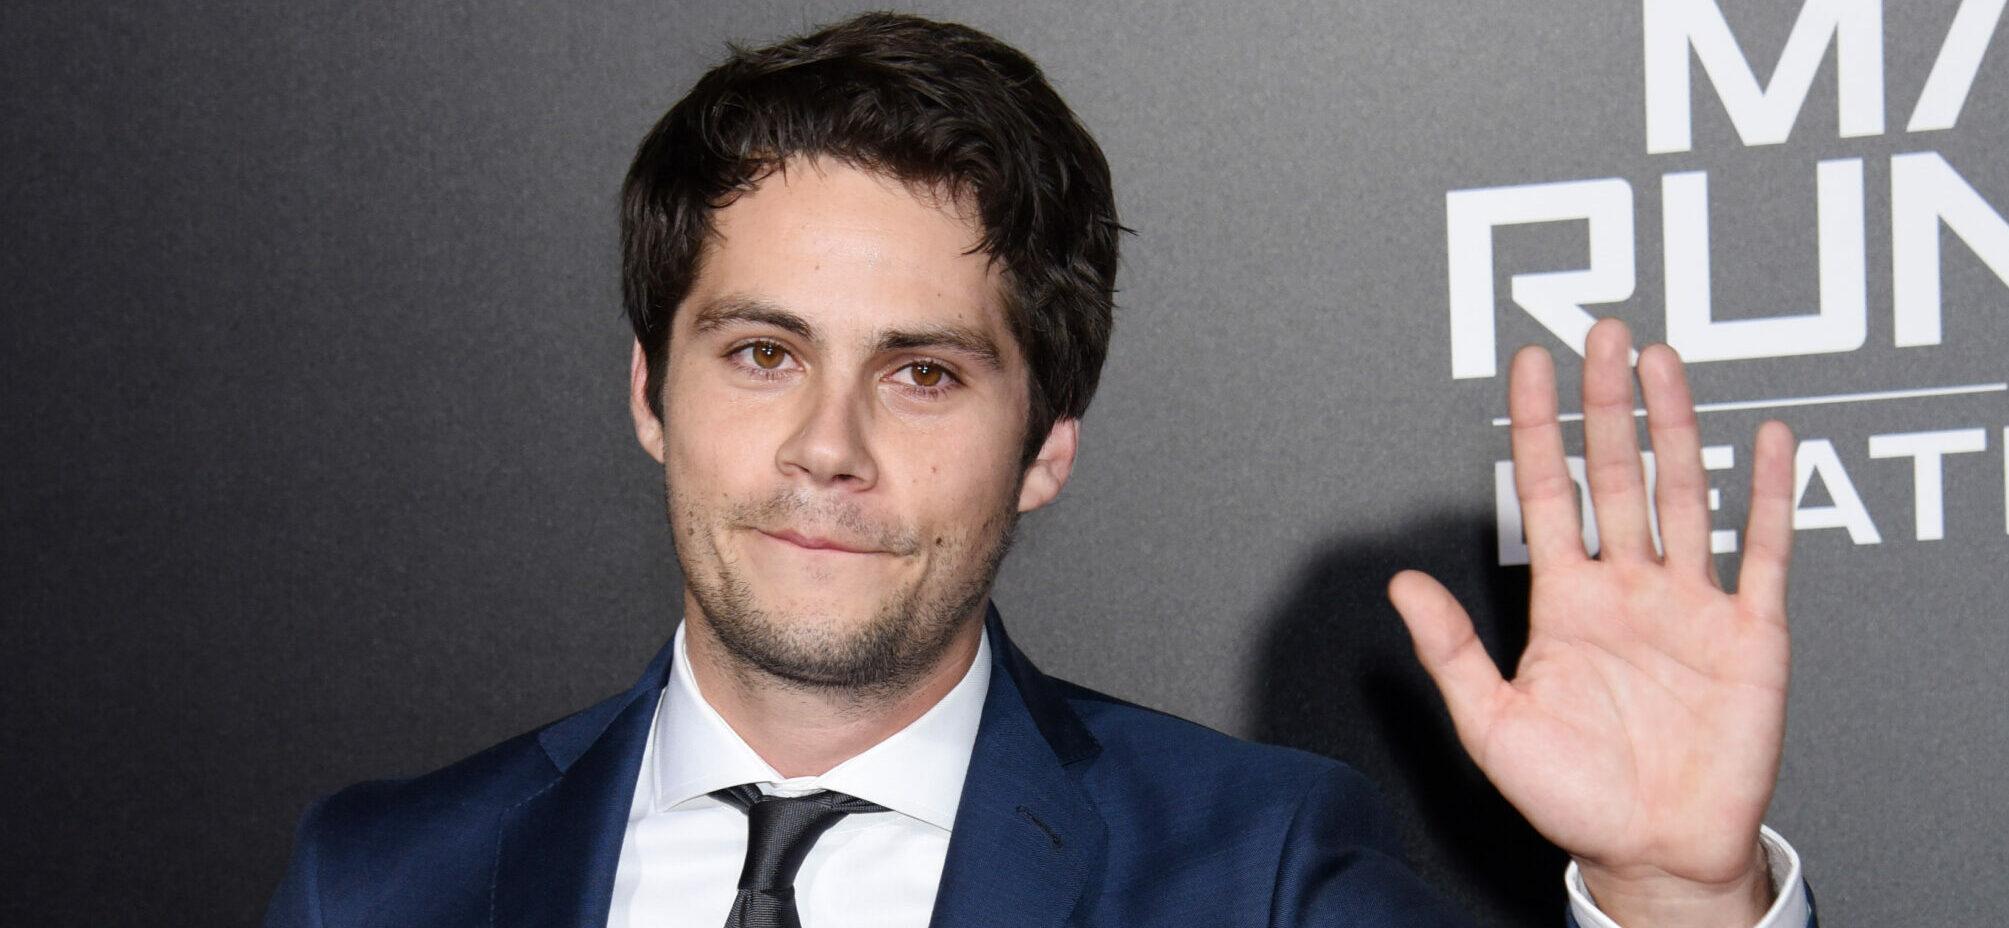 ‘Teen Wolf’ Star Dylan O’Brien Goes Down With Covid, Advises Public To Obey Health Rules